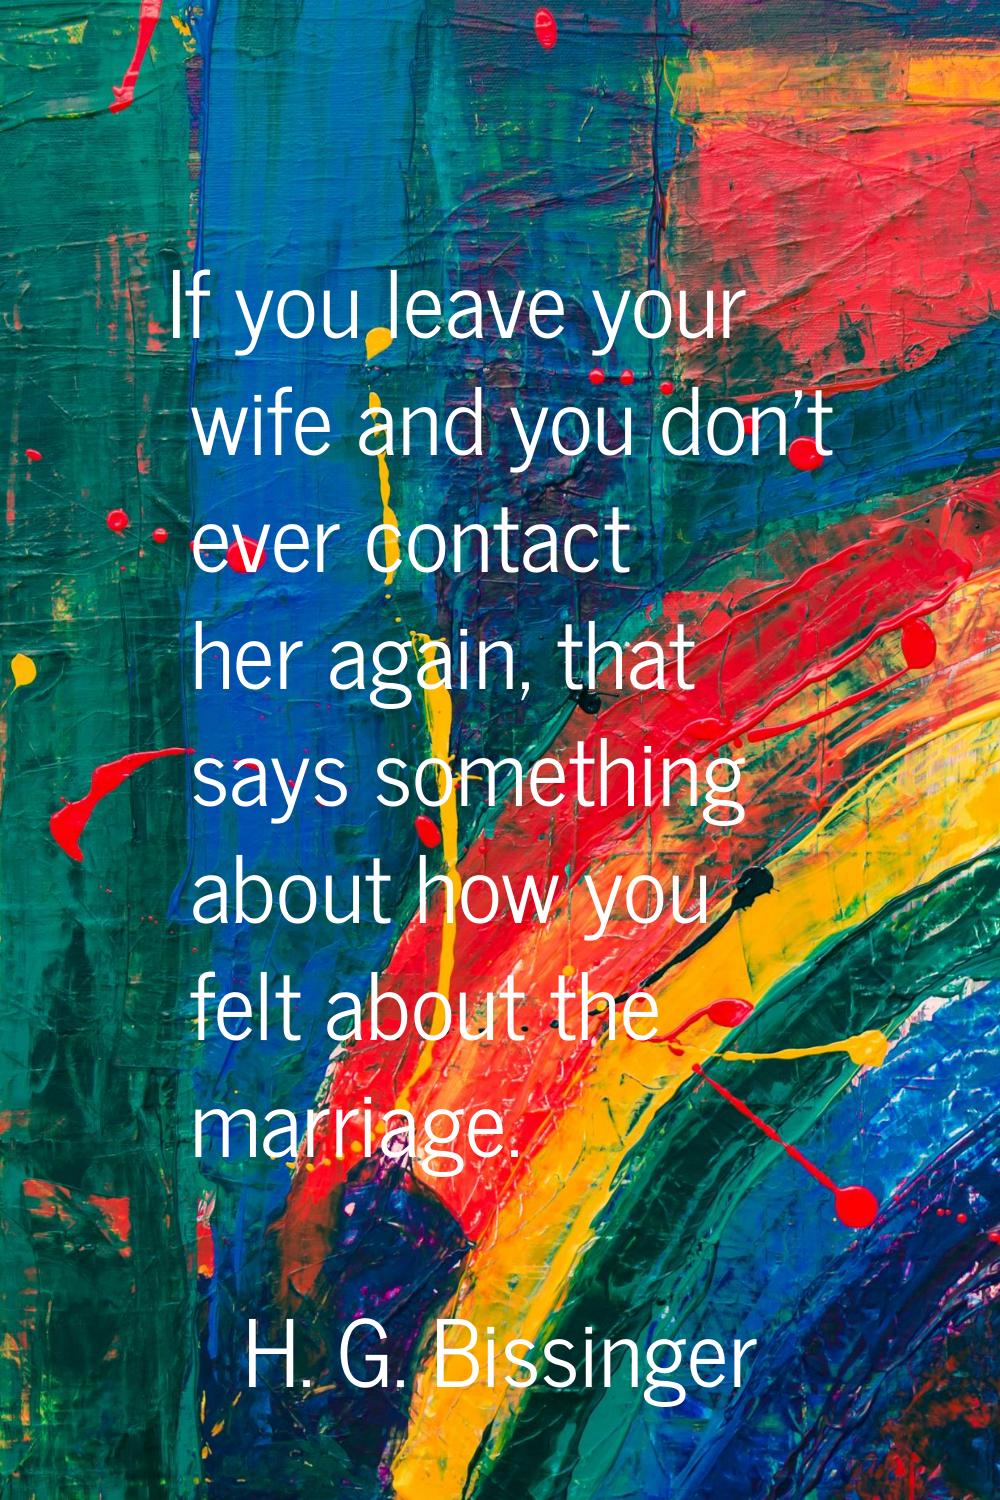 If you leave your wife and you don't ever contact her again, that says something about how you felt